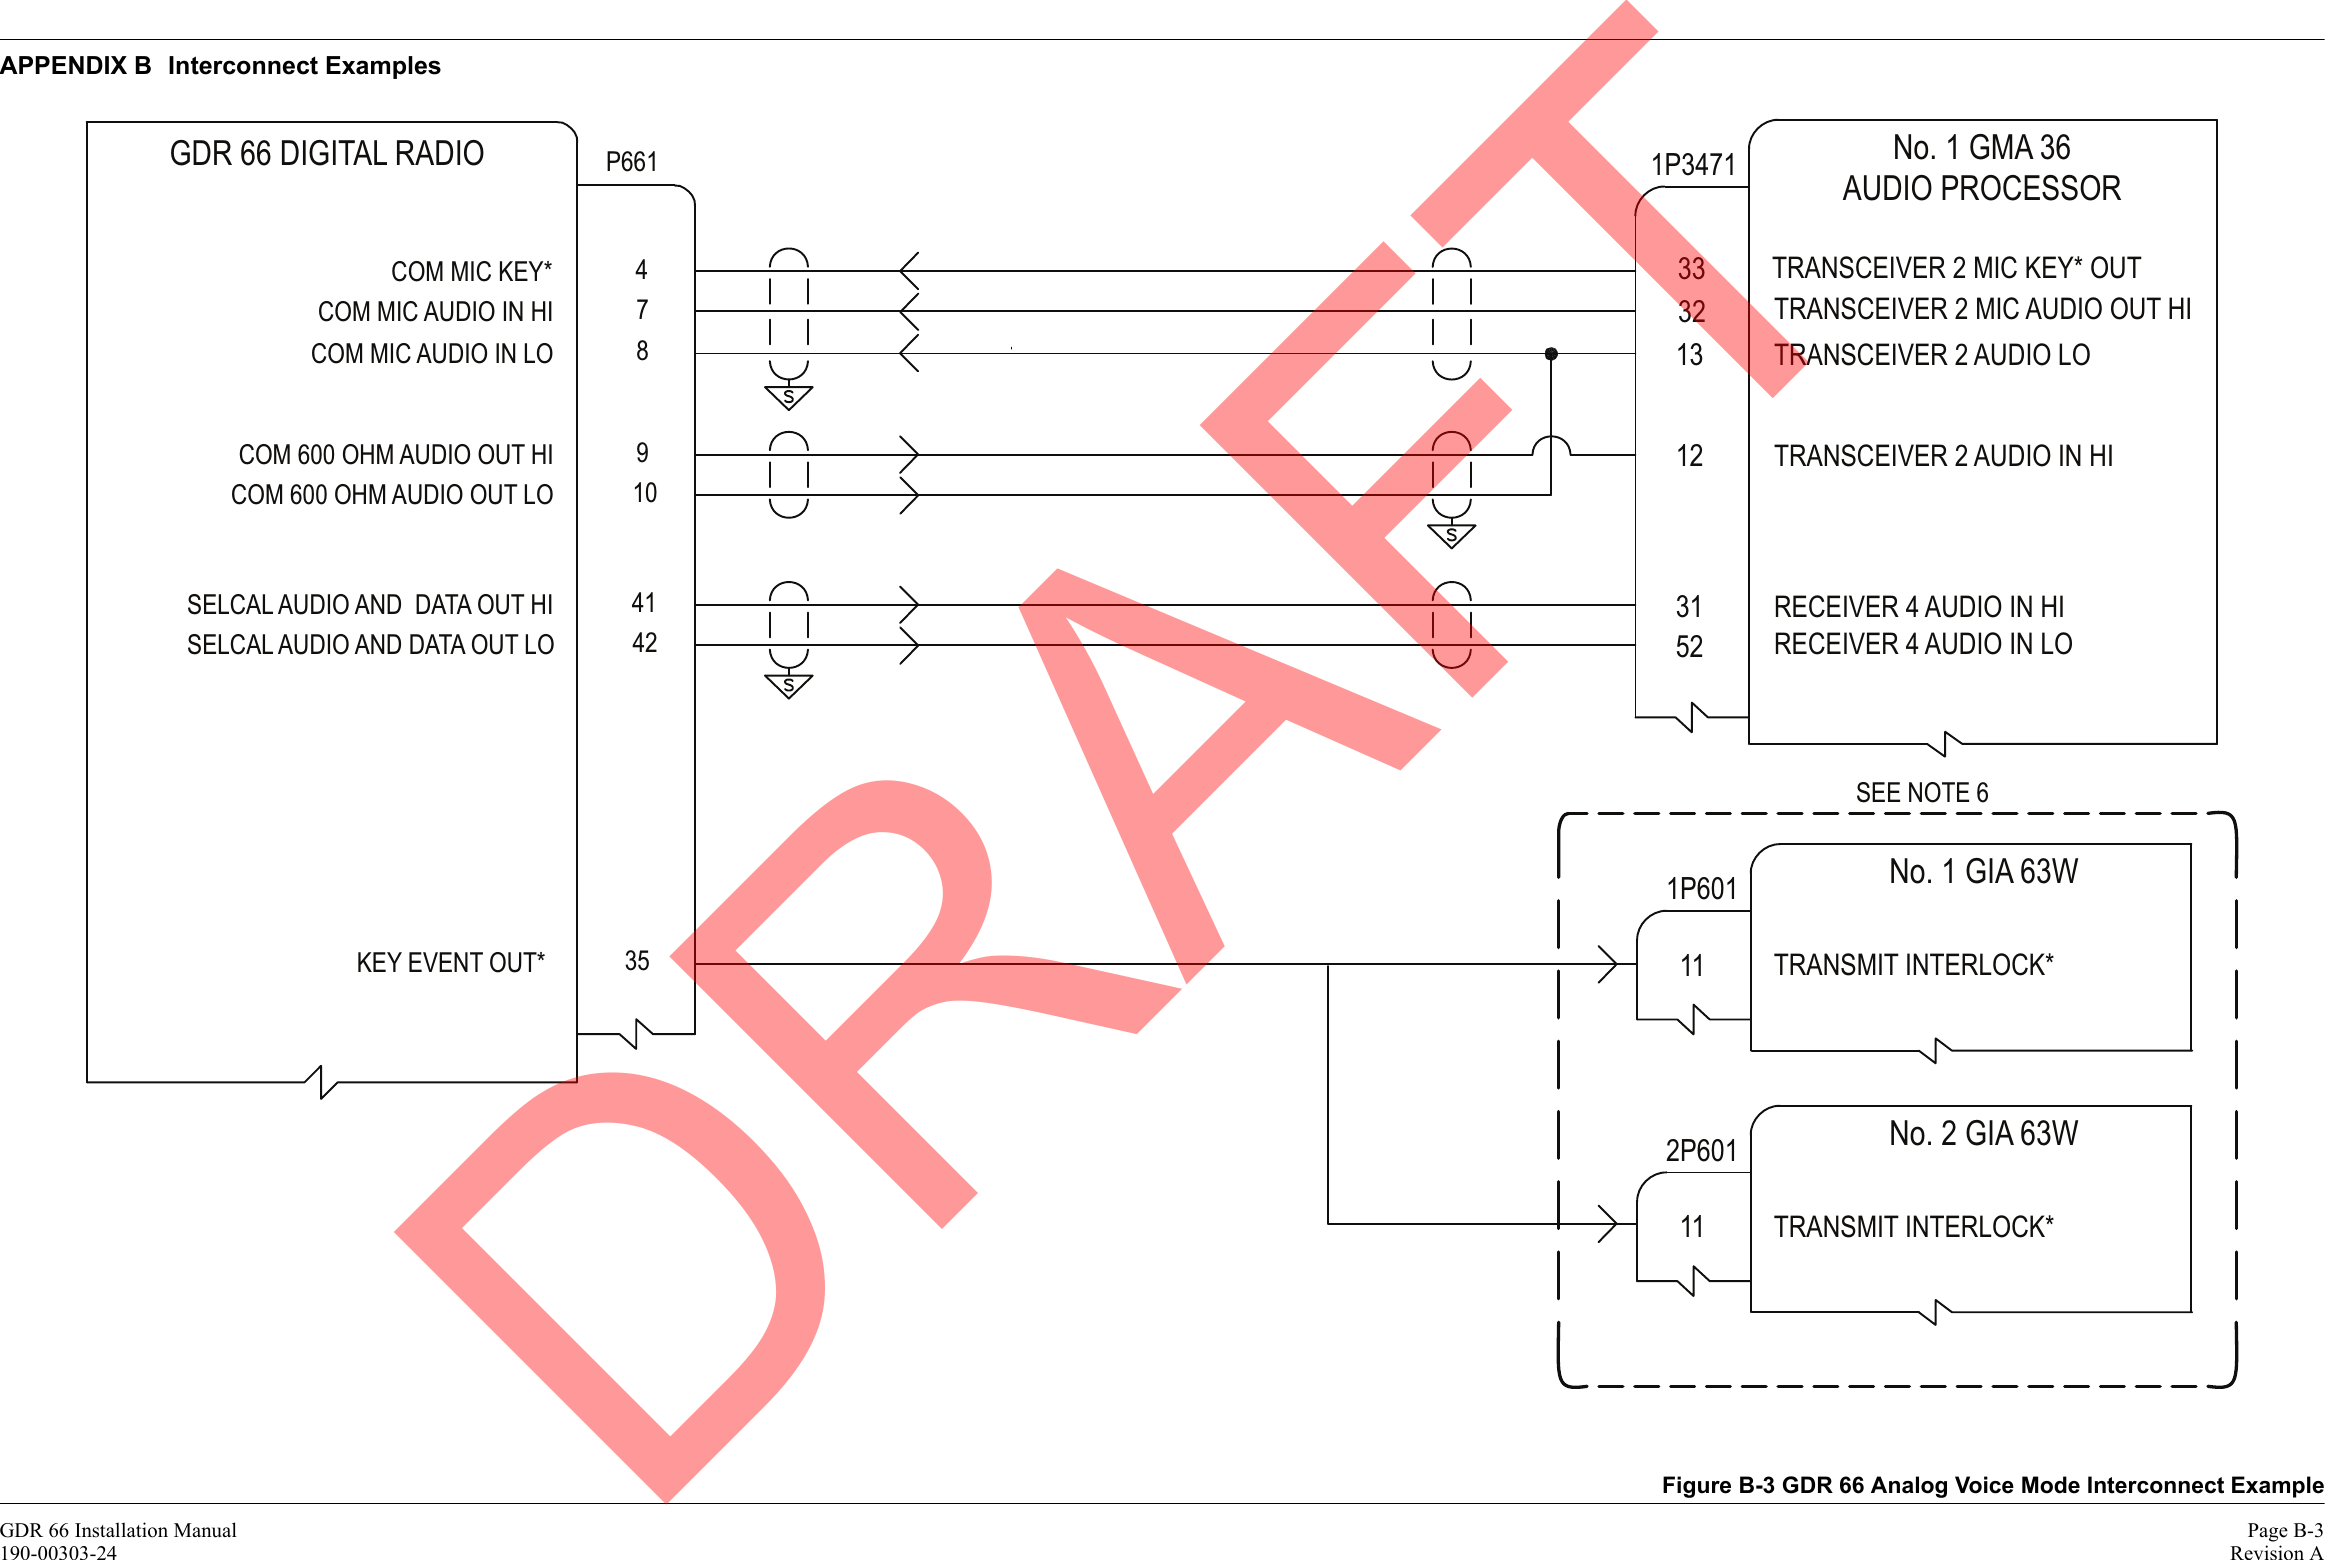 GDR 66 Installation Manual Page B-3190-00303-24 Revision AAPPENDIX B Interconnect ExamplesFigure B-3 GDR 66 Analog Voice Mode Interconnect Example478GDR 66 DIGITAL RADIO P661COM MIC KEY* COM MIC AUDIO IN HI  COM MIC AUDIO IN LO No. 1 GMA 36AUDIO PROCESSOR1P34713233TRANSCEIVER 2 MIC KEY* OUTTRANSCEIVER 2 MIC AUDIO OUT HI13TRANSCEIVER 2 AUDIO LONo. 1 GIA 63W1P60111TRANSMIT INTERLOCK*No. 2 GIA 63W2P60111TRANSMIT INTERLOCK*35KEY EVENT OUT* SEE NOTE 6 910COM 600 OHM AUDIO OUT HI COM 600 OHM AUDIO OUT LO 12TRANSCEIVER 2 AUDIO IN HI4142SELCAL AUDIO AND  DATA OUT HI SELCAL AUDIO AND DATA OUT LO 3152RECEIVER 4 AUDIO IN HIRECEIVER 4 AUDIO IN LO DRAFT